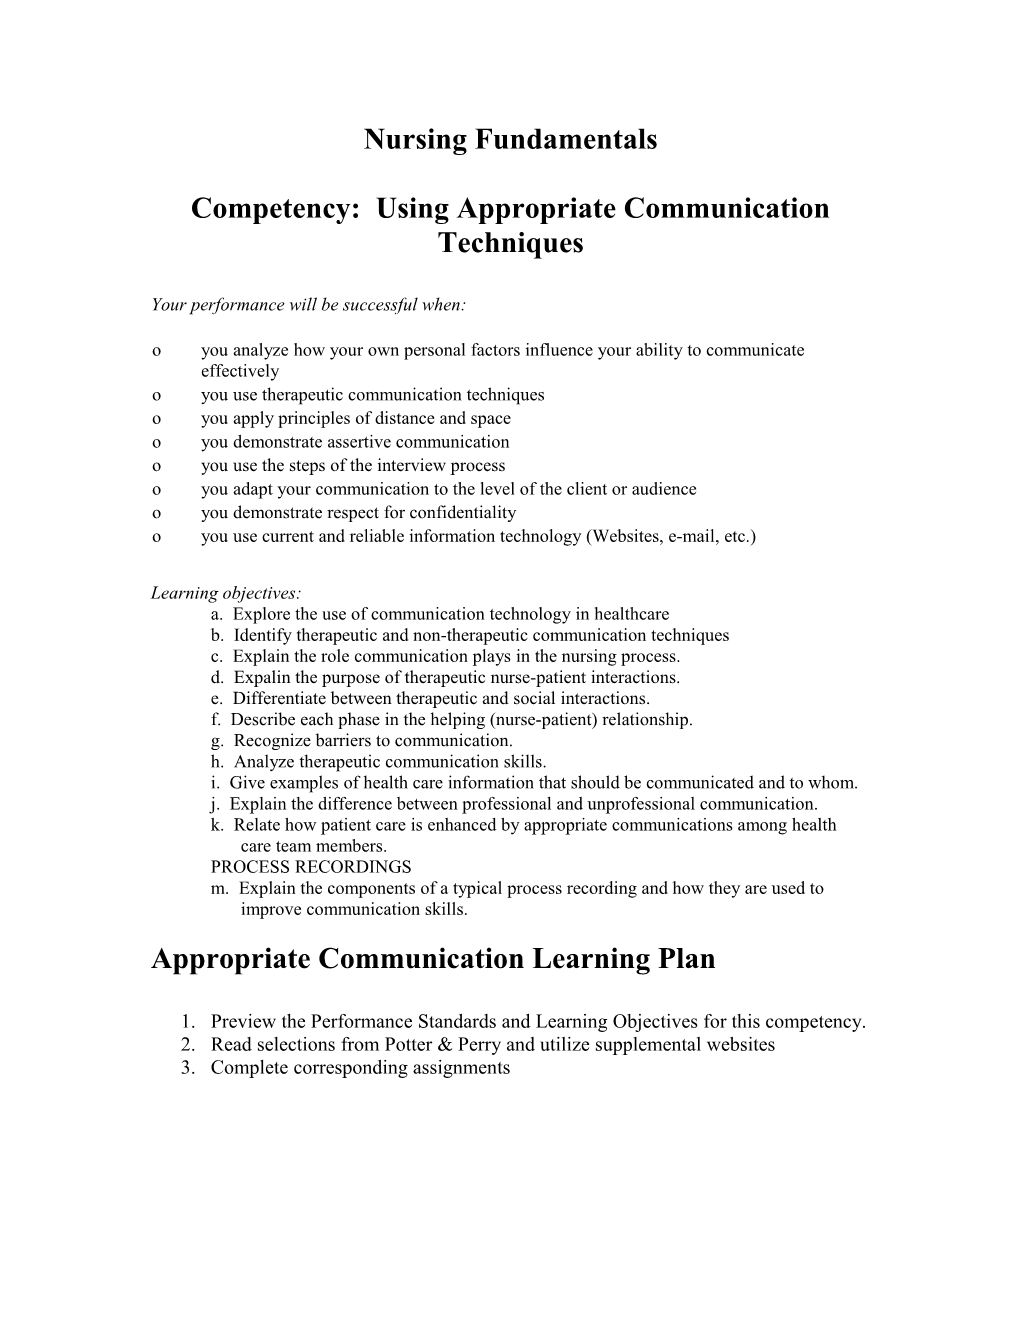 Competency: Using Appropriate Communication Techniques